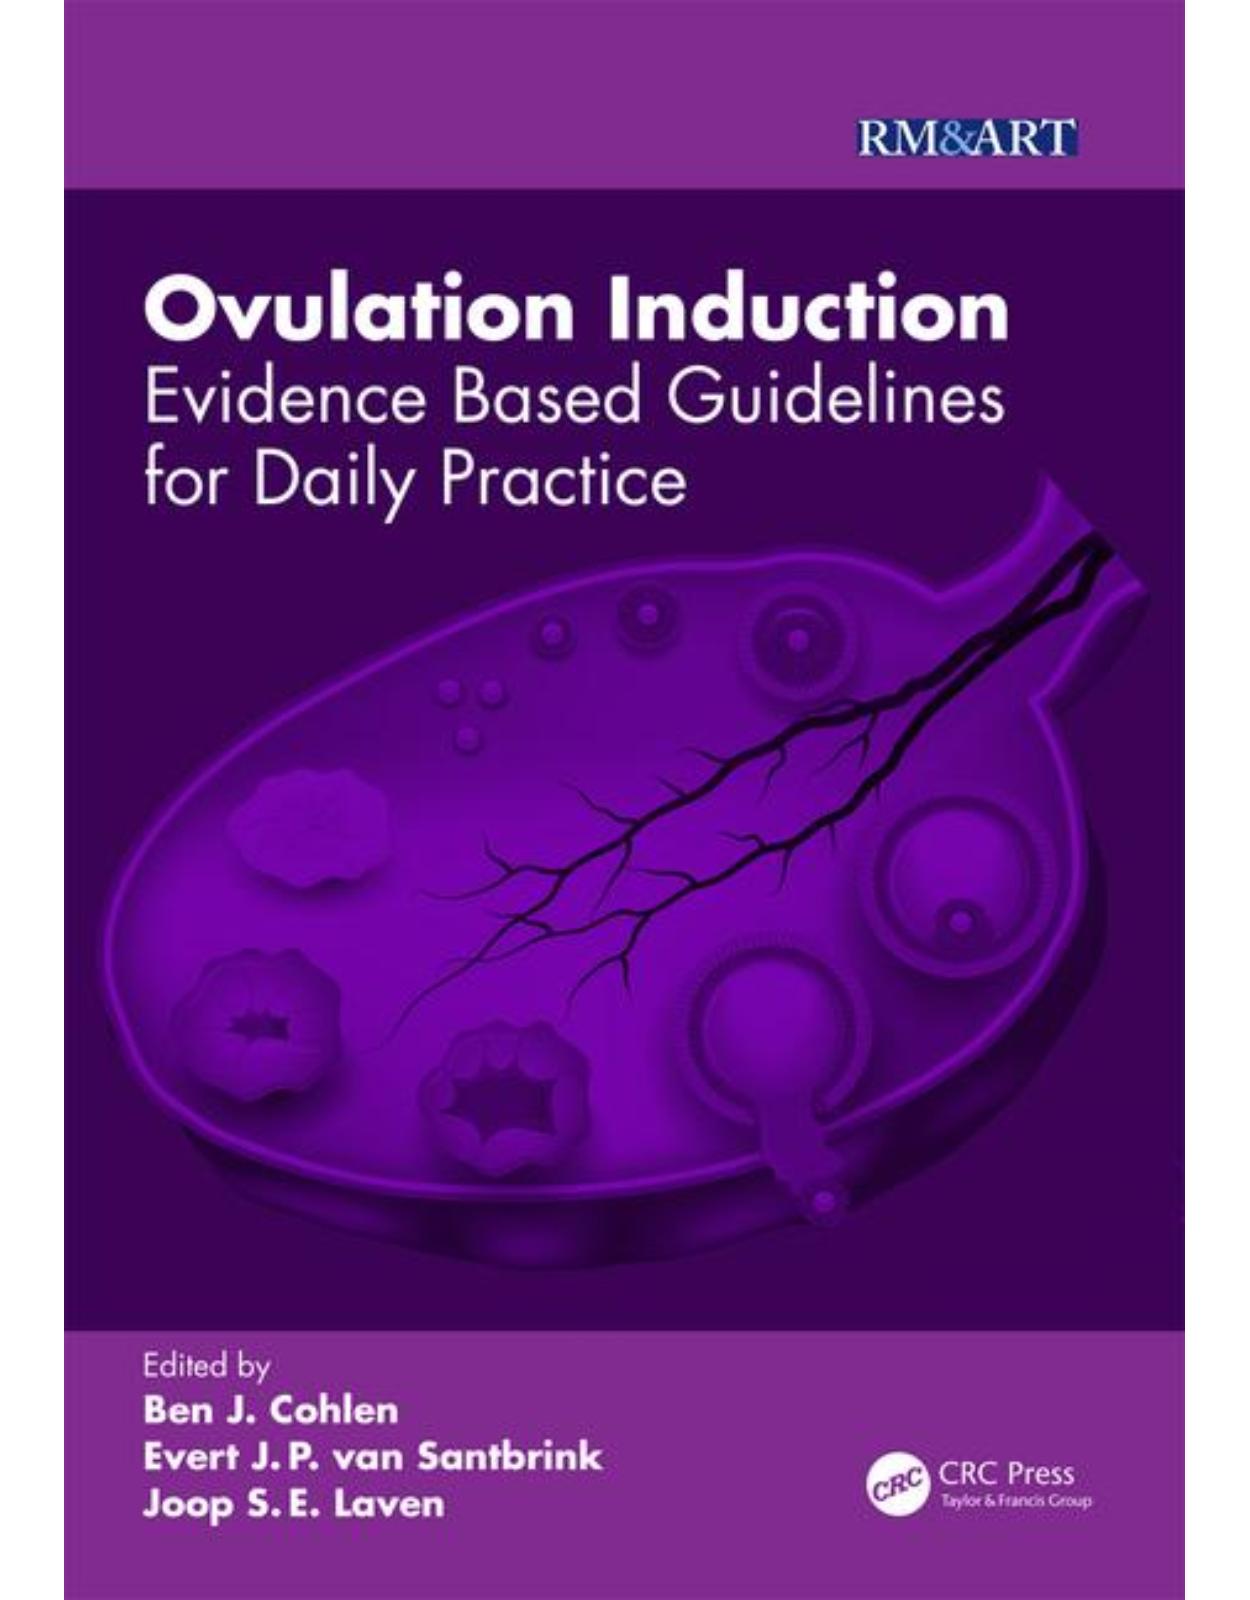 Ovulation Induction: Evidence Based Guidelines for Daily Practice